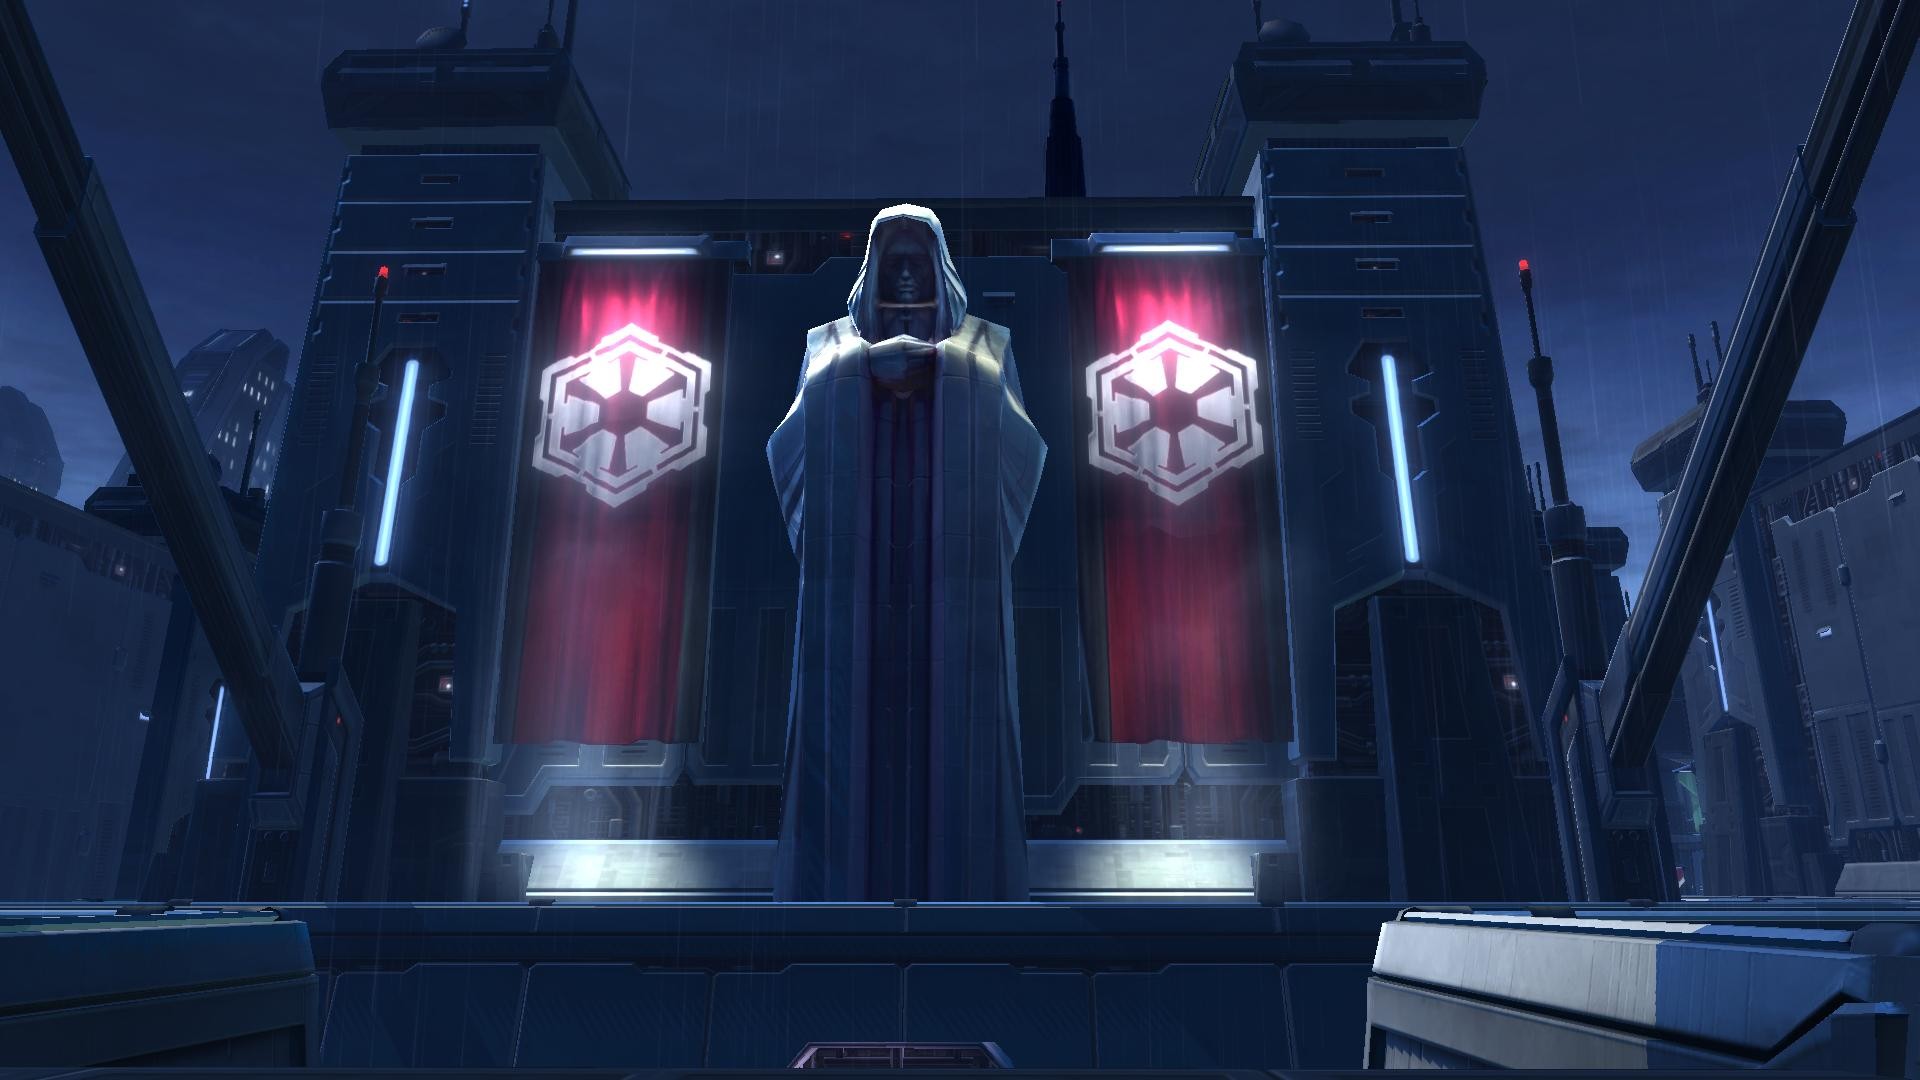 General 1920x1080 Star Wars science fiction artwork SWTOR Star Wars: The Old Republic PC gaming Dromund Kaas